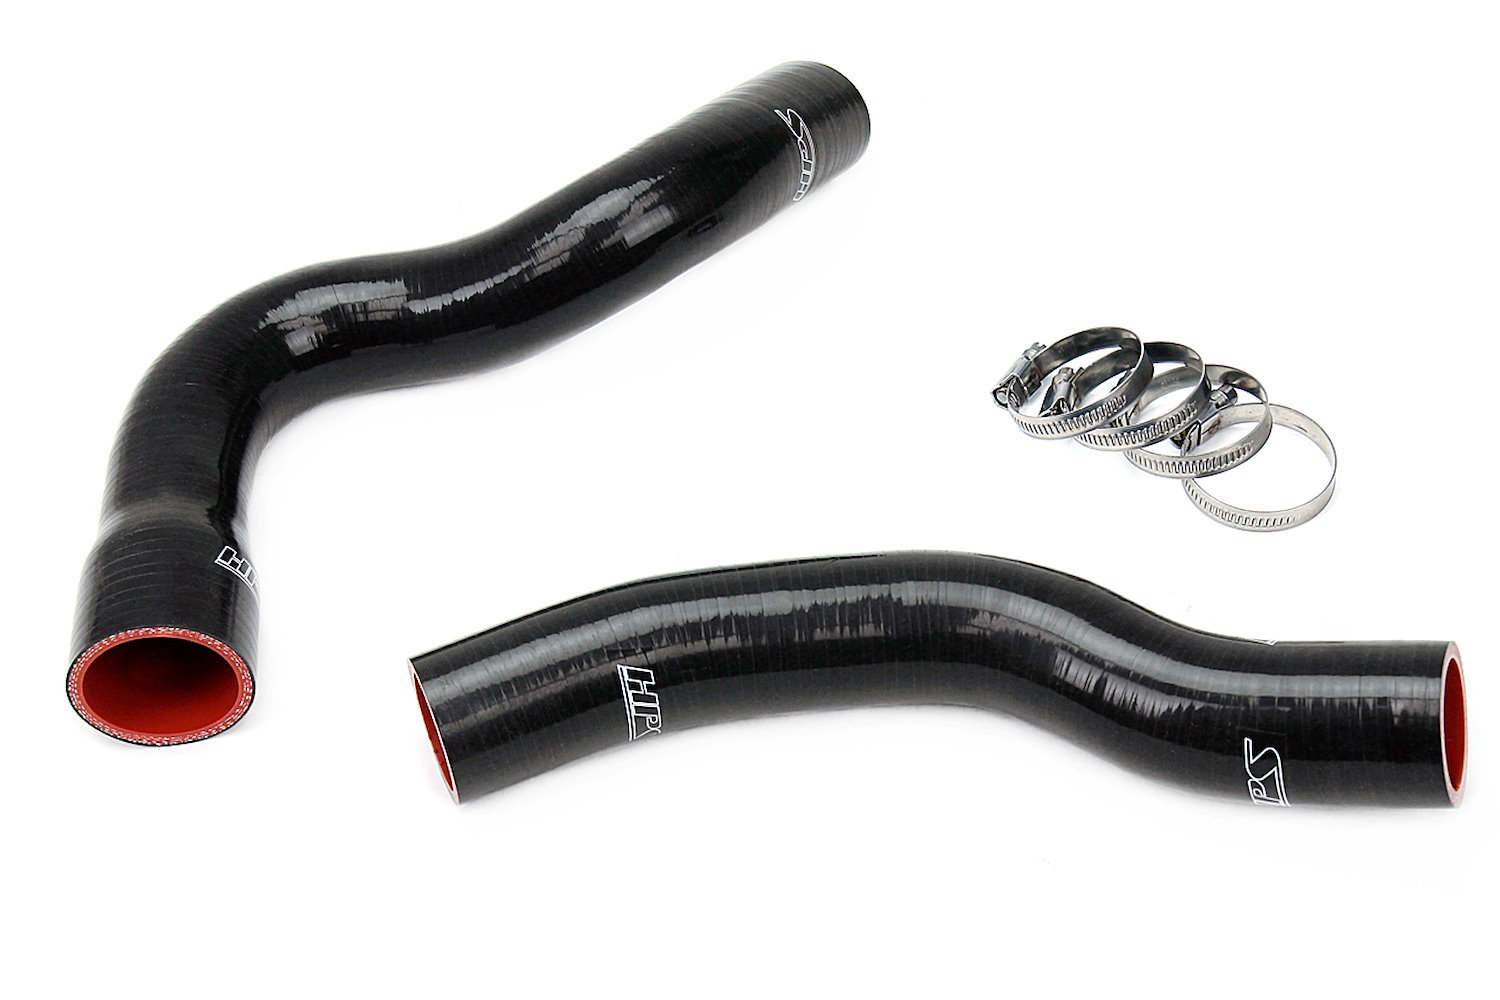 57-1449R-BLK Radiator Hose Kit, High-Temp 3-Ply Reinforced Silicone, Replace OEM Rubber Radiator Coolant Hoses